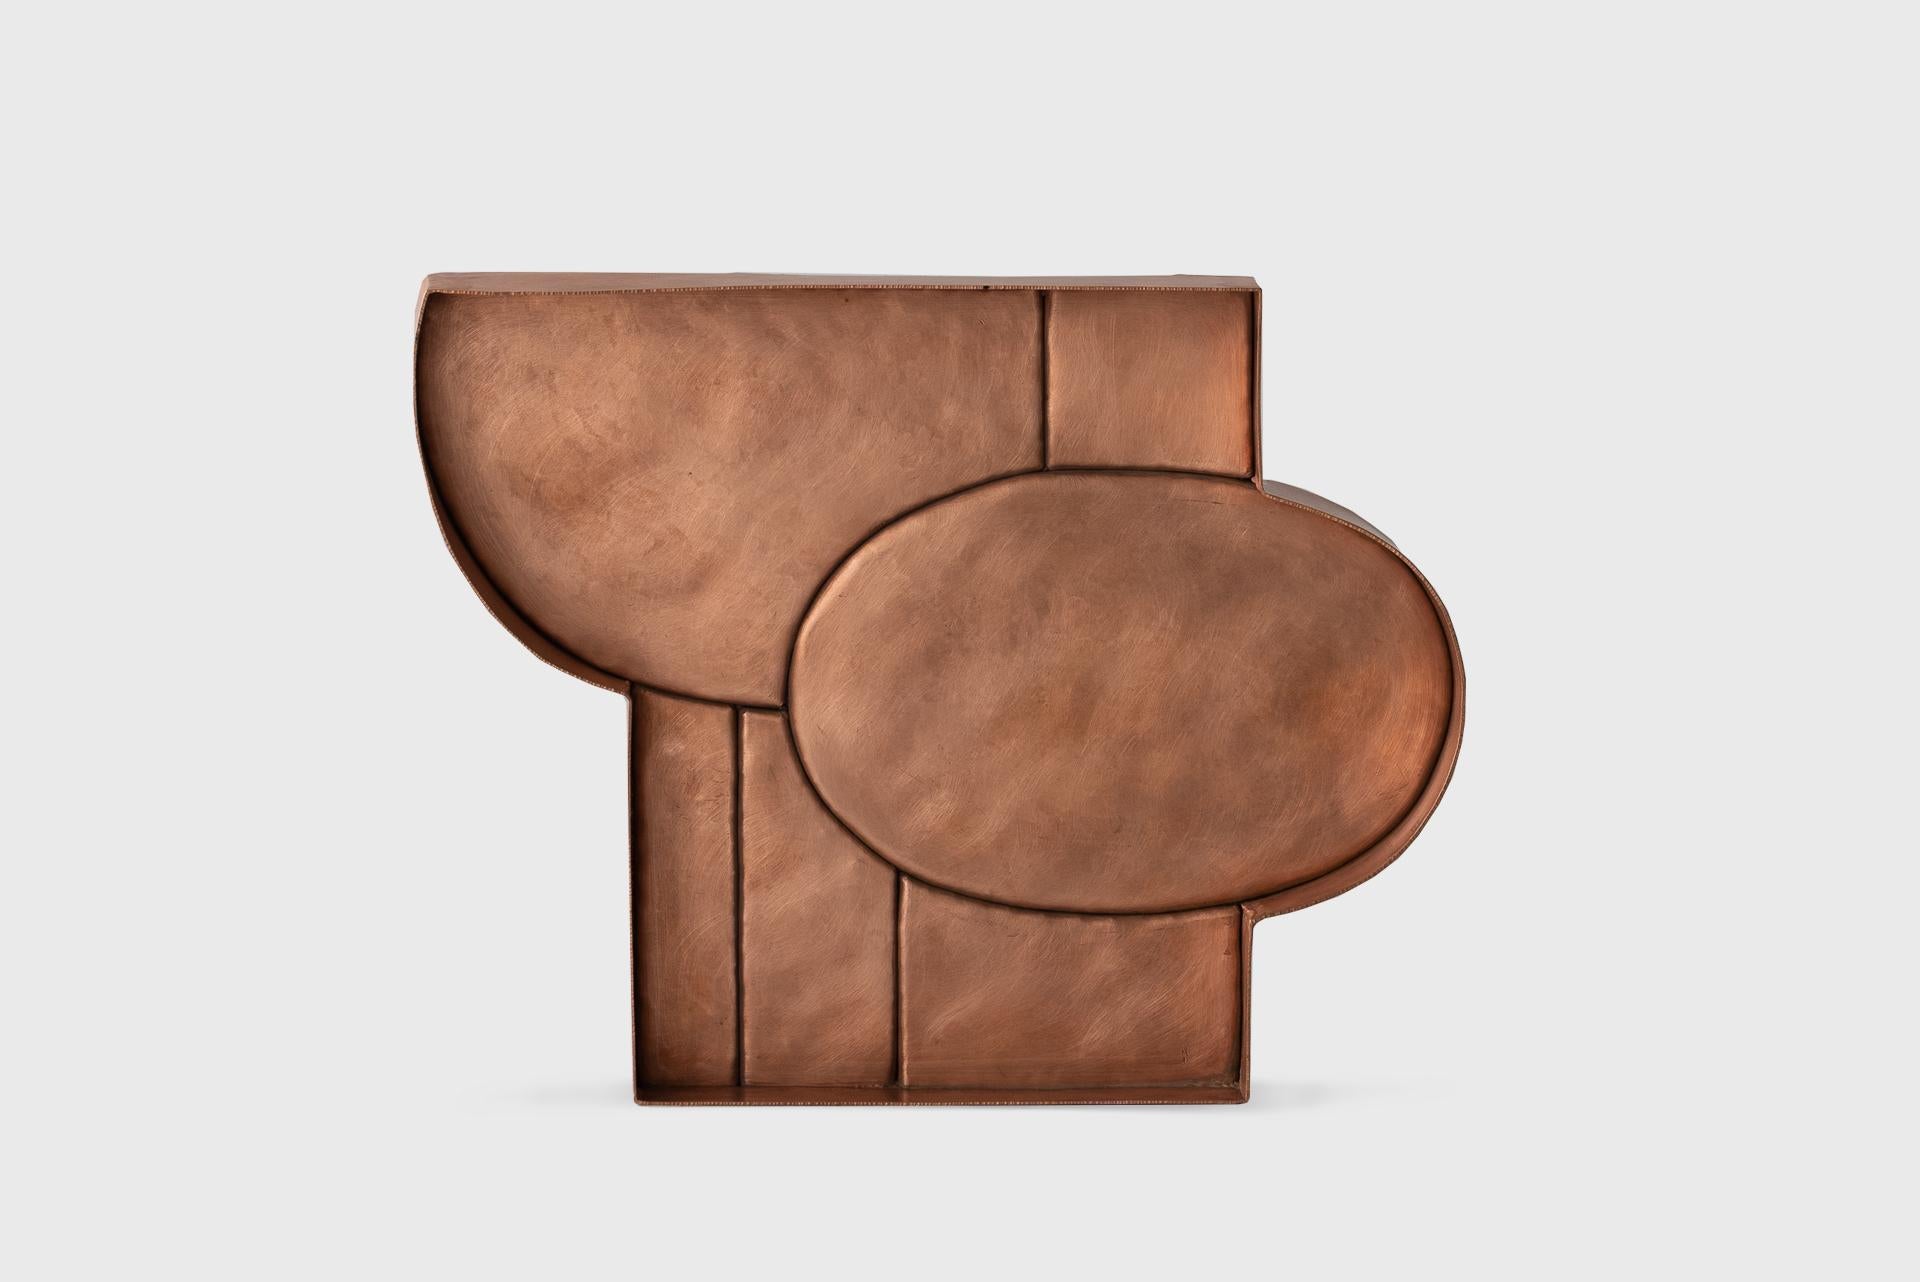 Copper Contemporary Wall Object 1, Textured Natural Dark Lacquer, Seung Hyun Lee, Korea For Sale